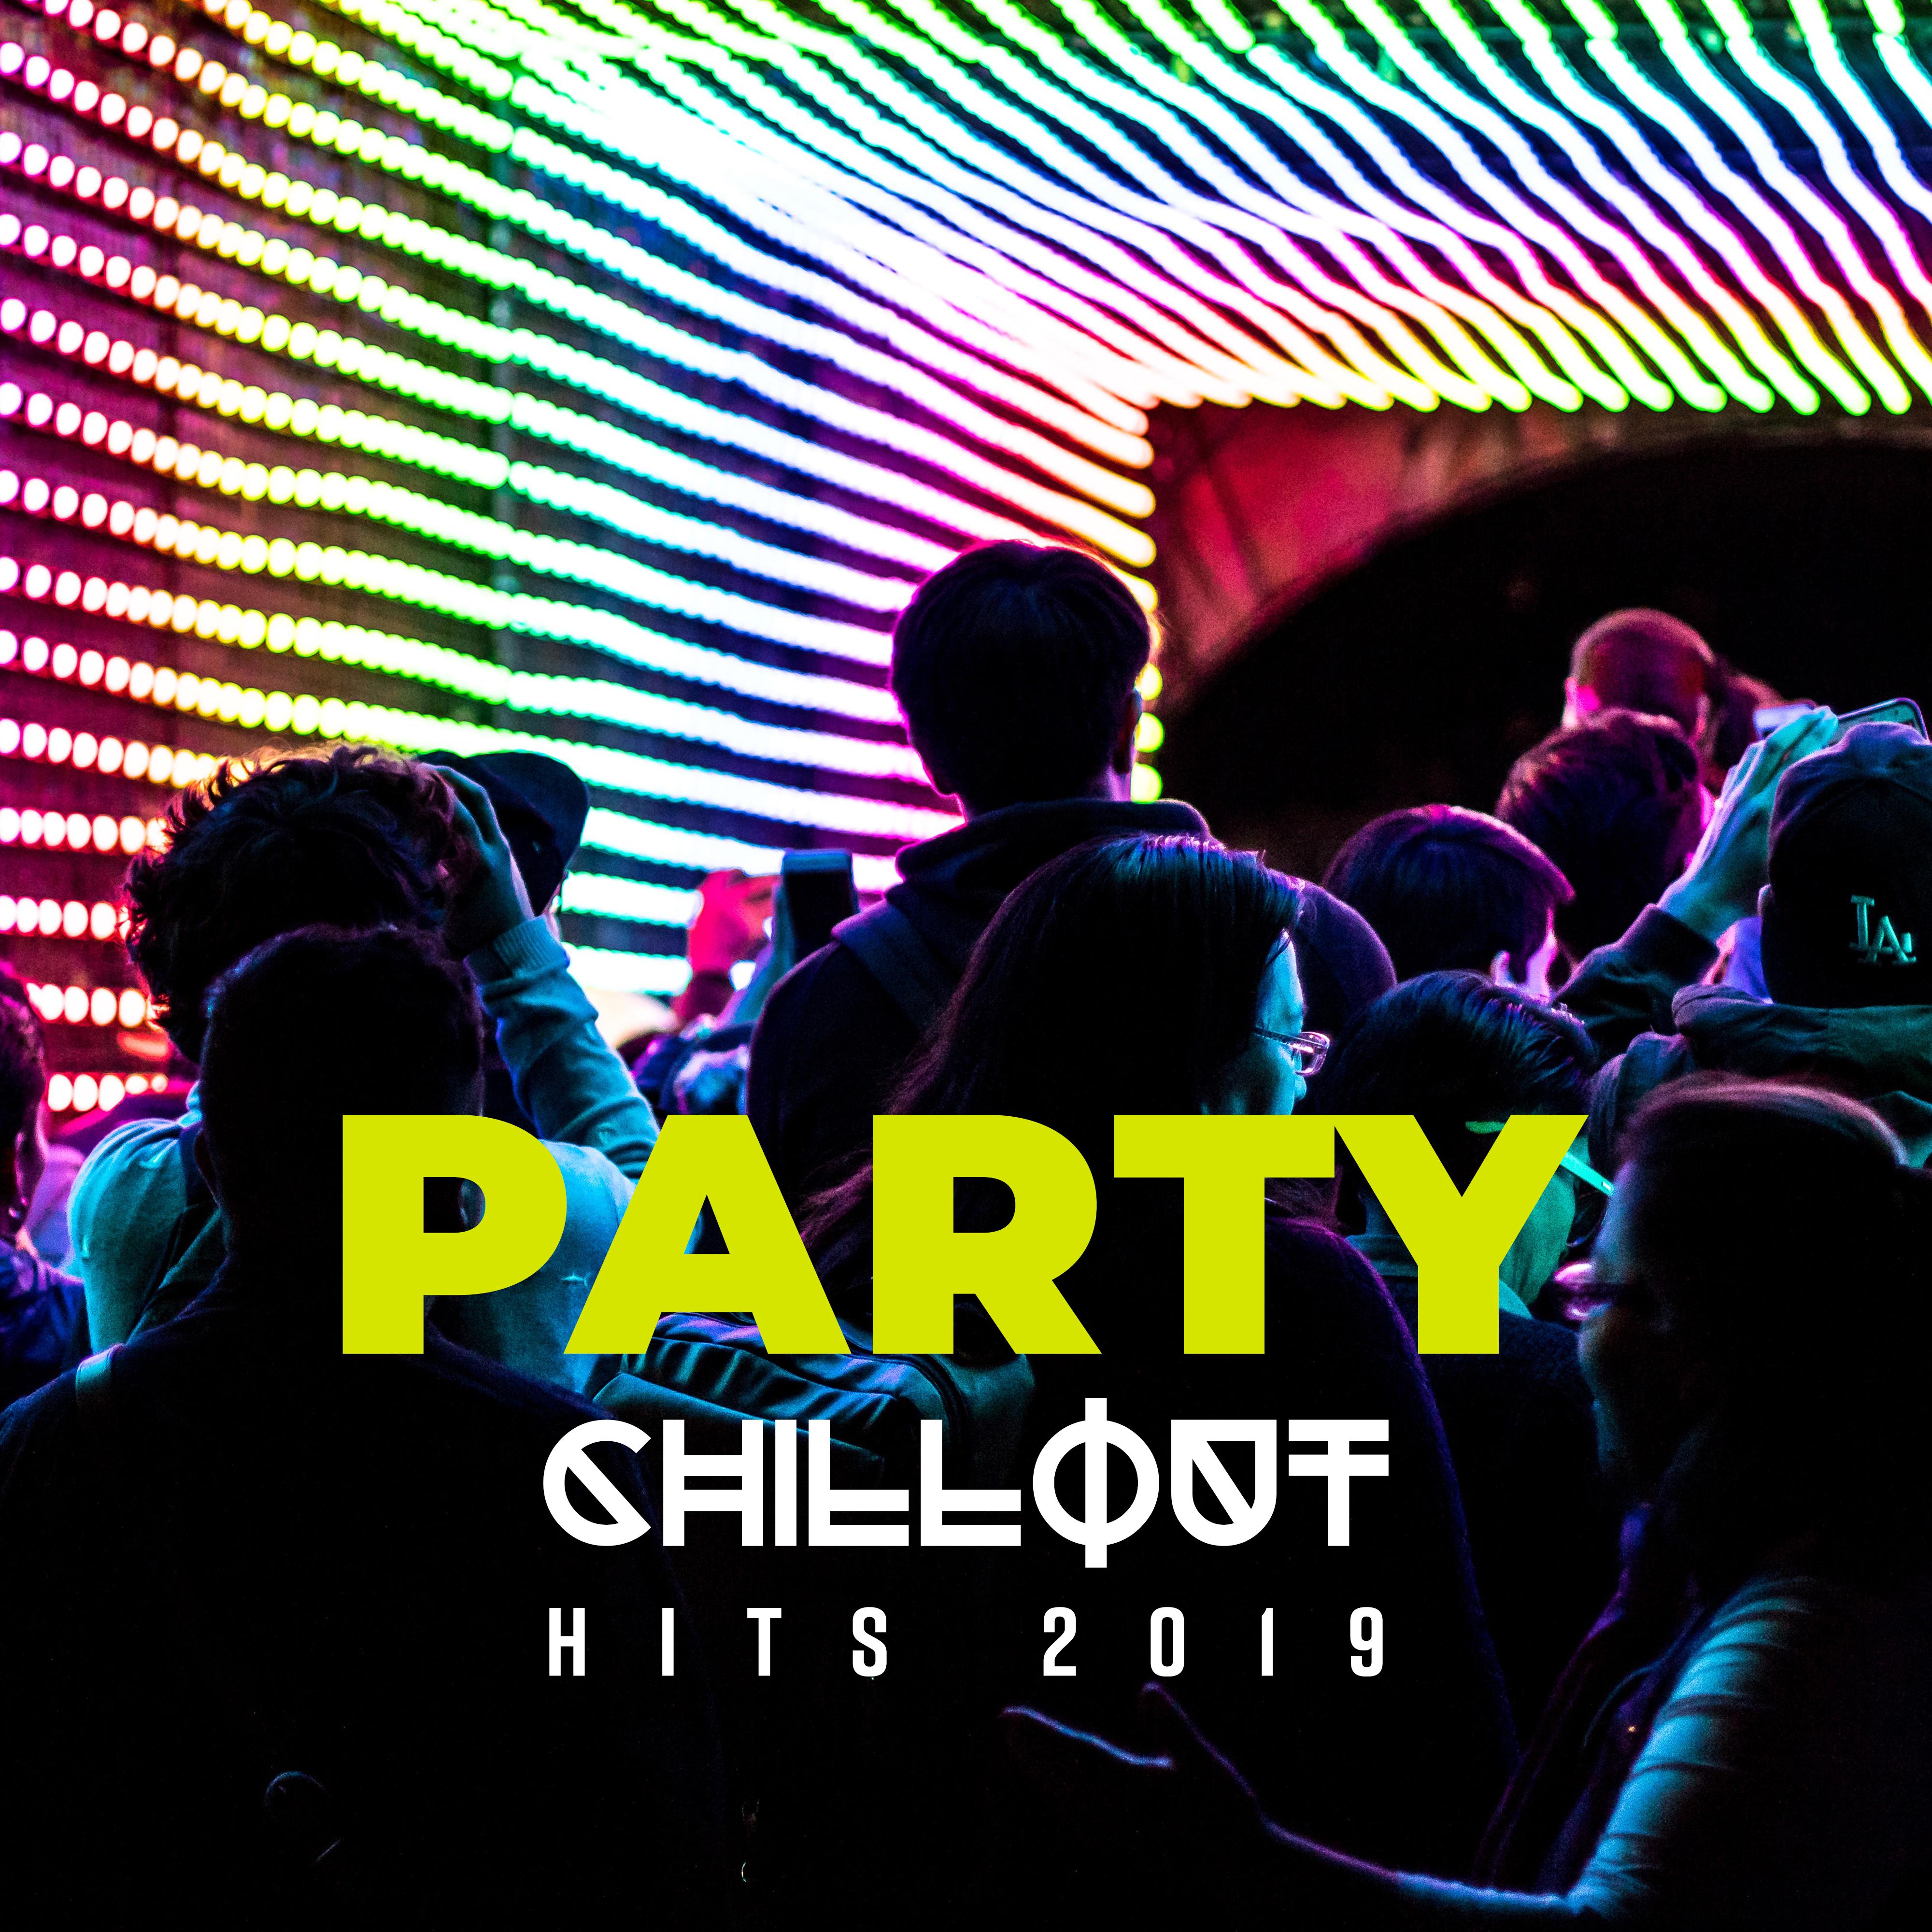 Party Chillout Hits 2019 – **** Electronic Beats for Dancing & Relaxing